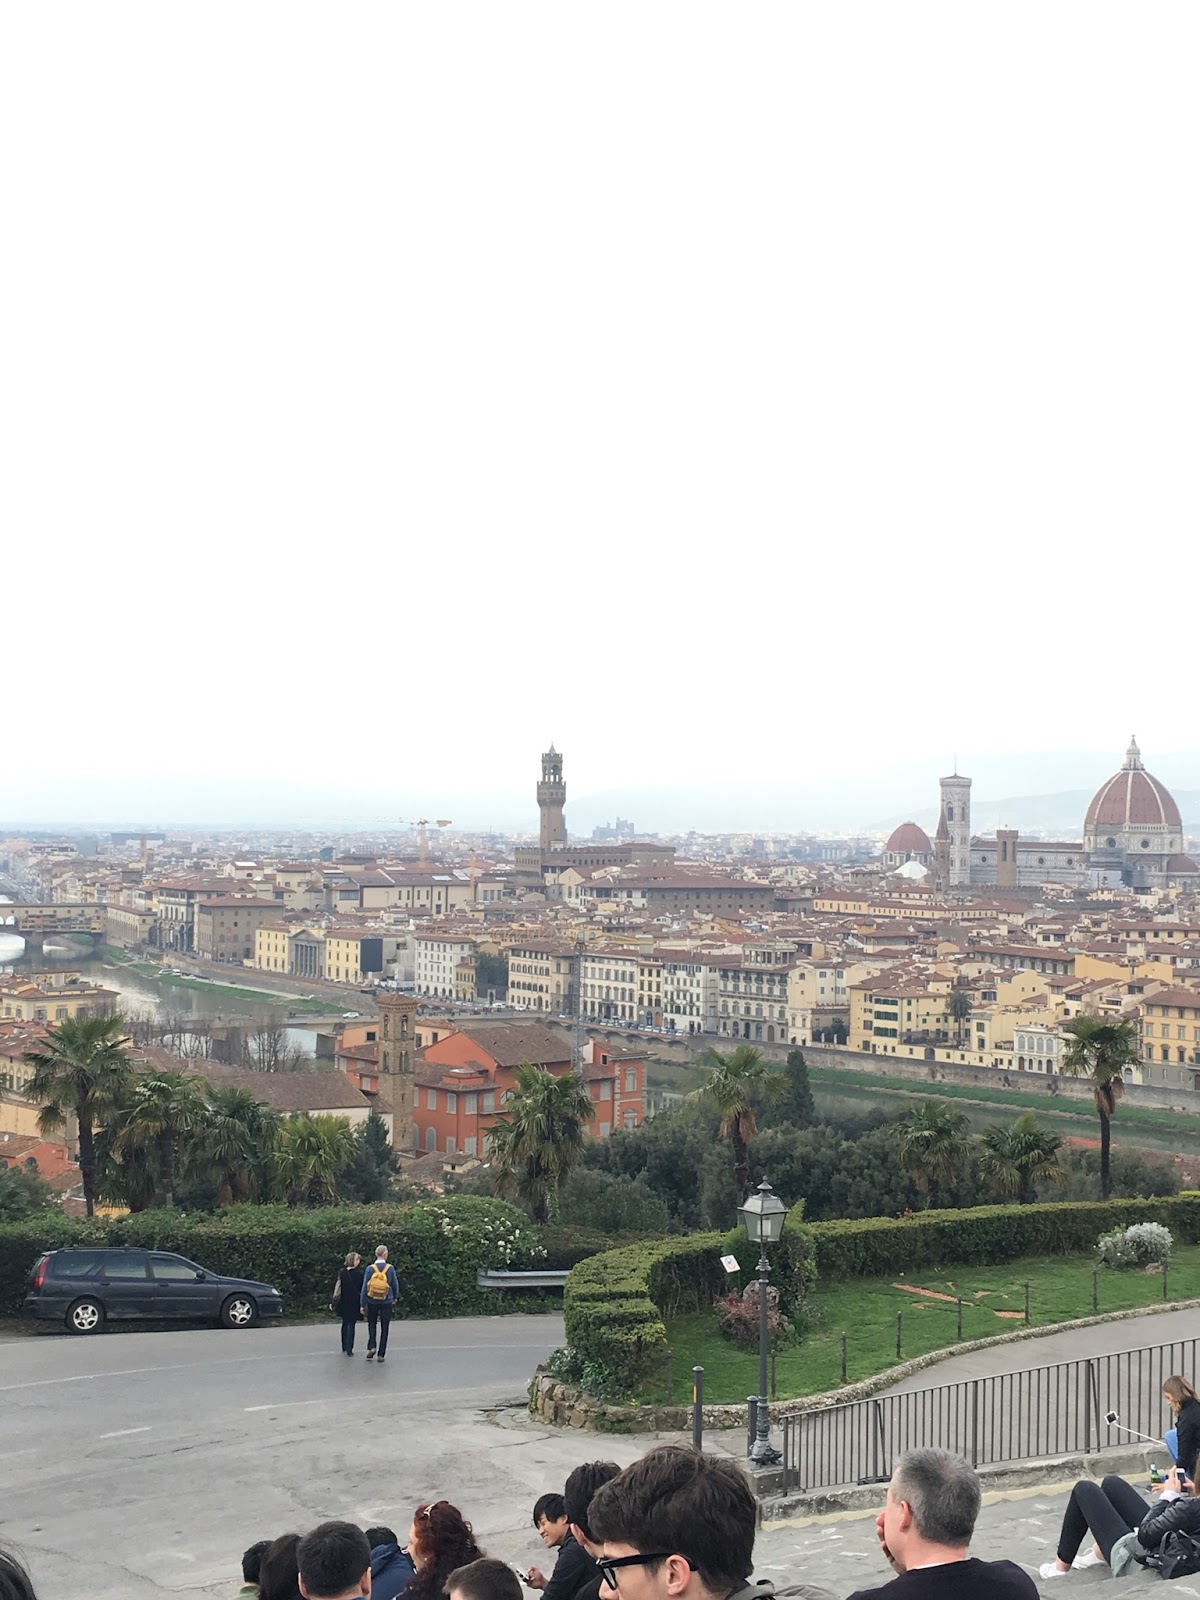 A skyline view looking down a hill at the old city of Florence